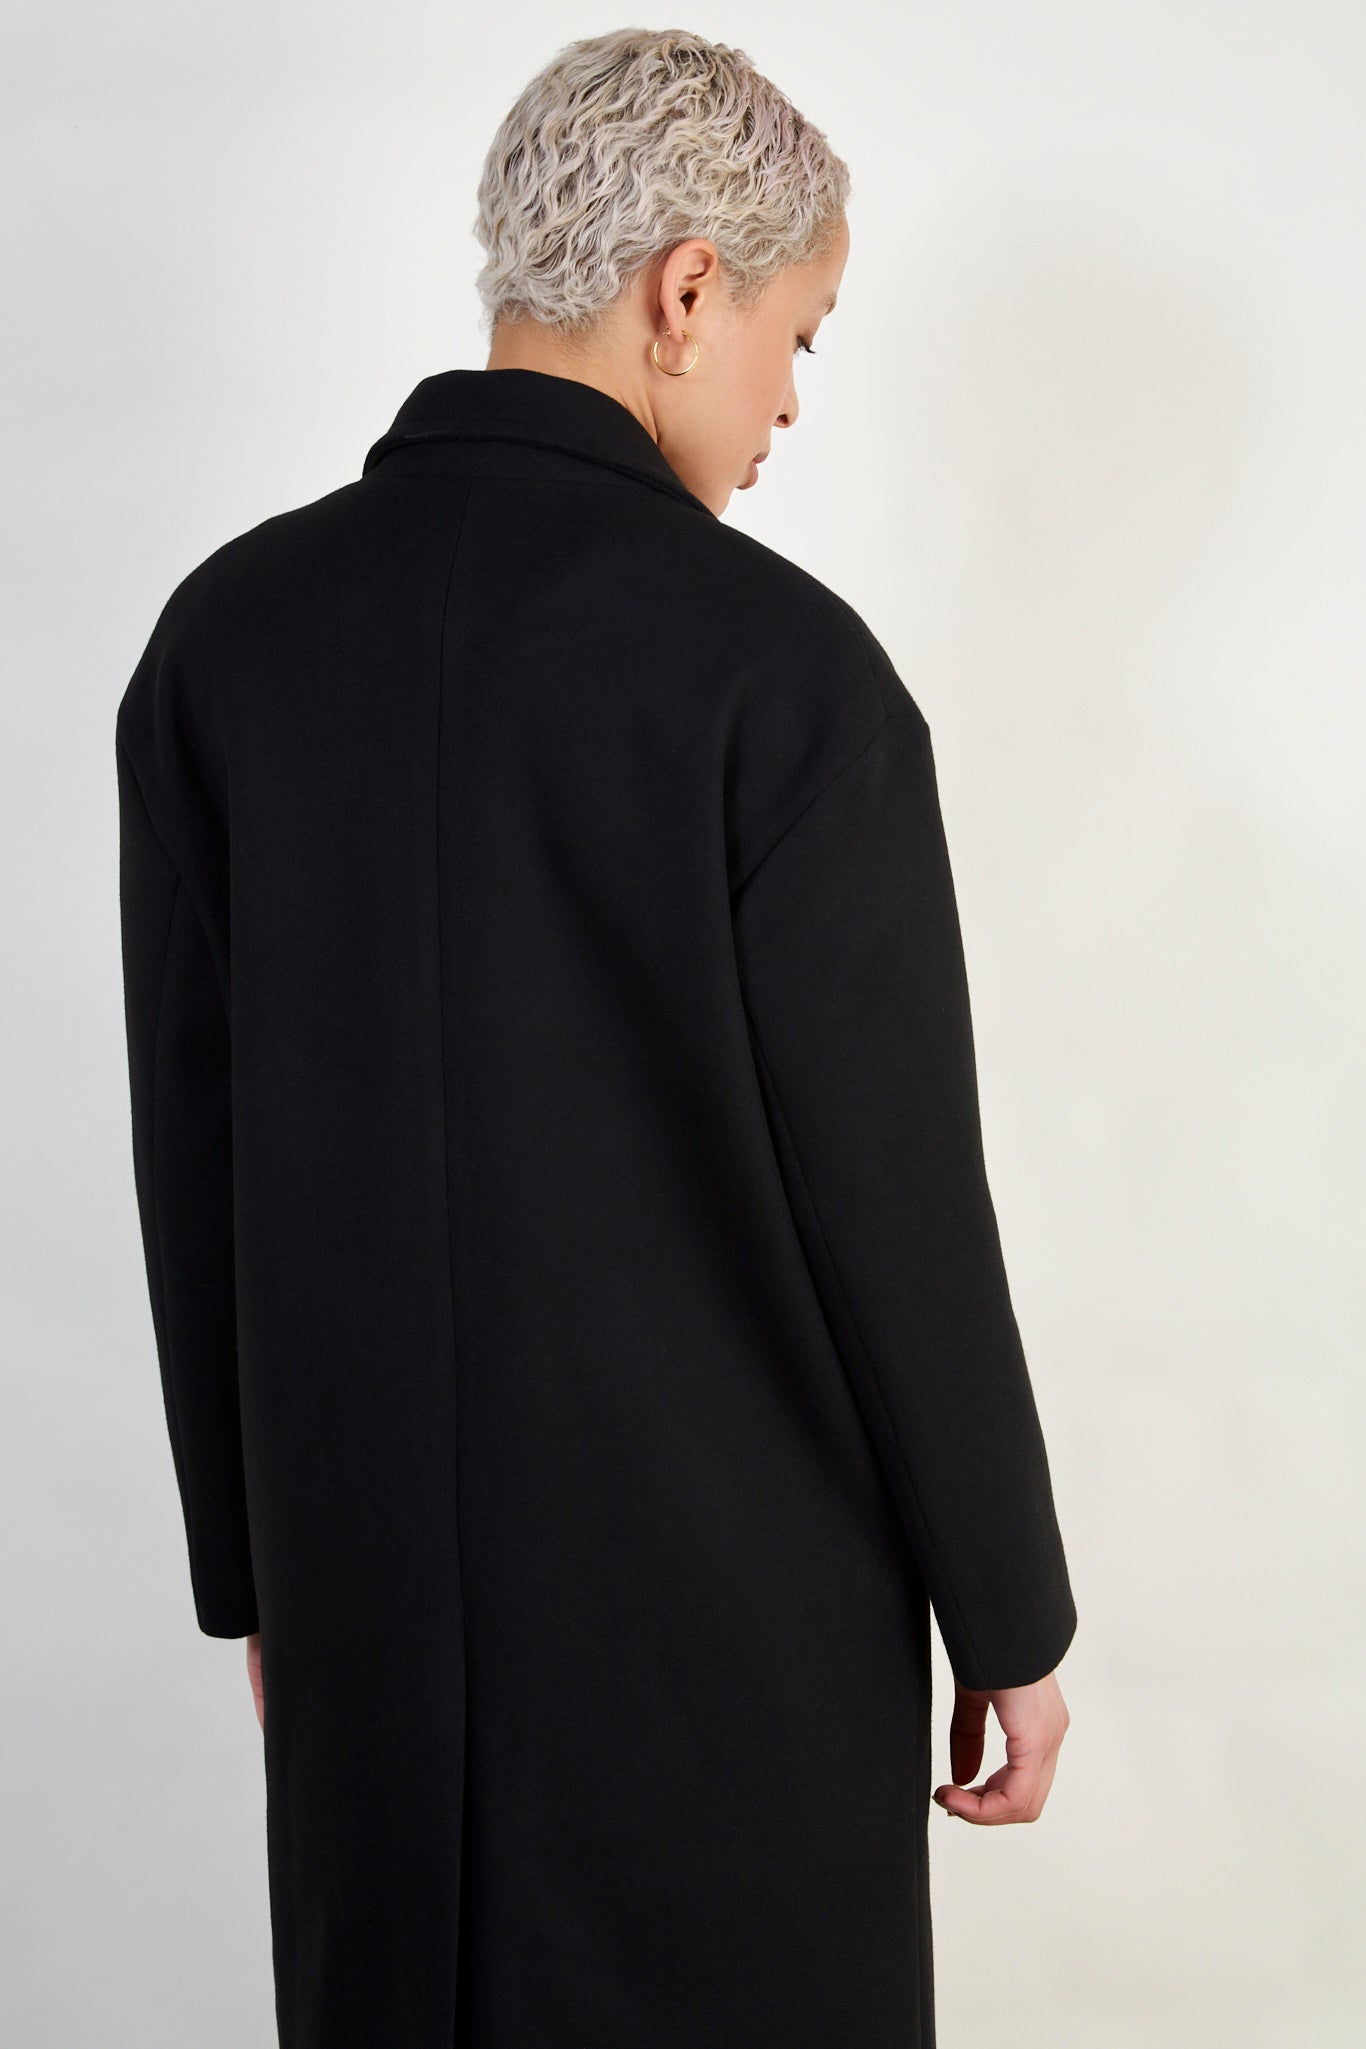 Black wool blend double breast tailored coat